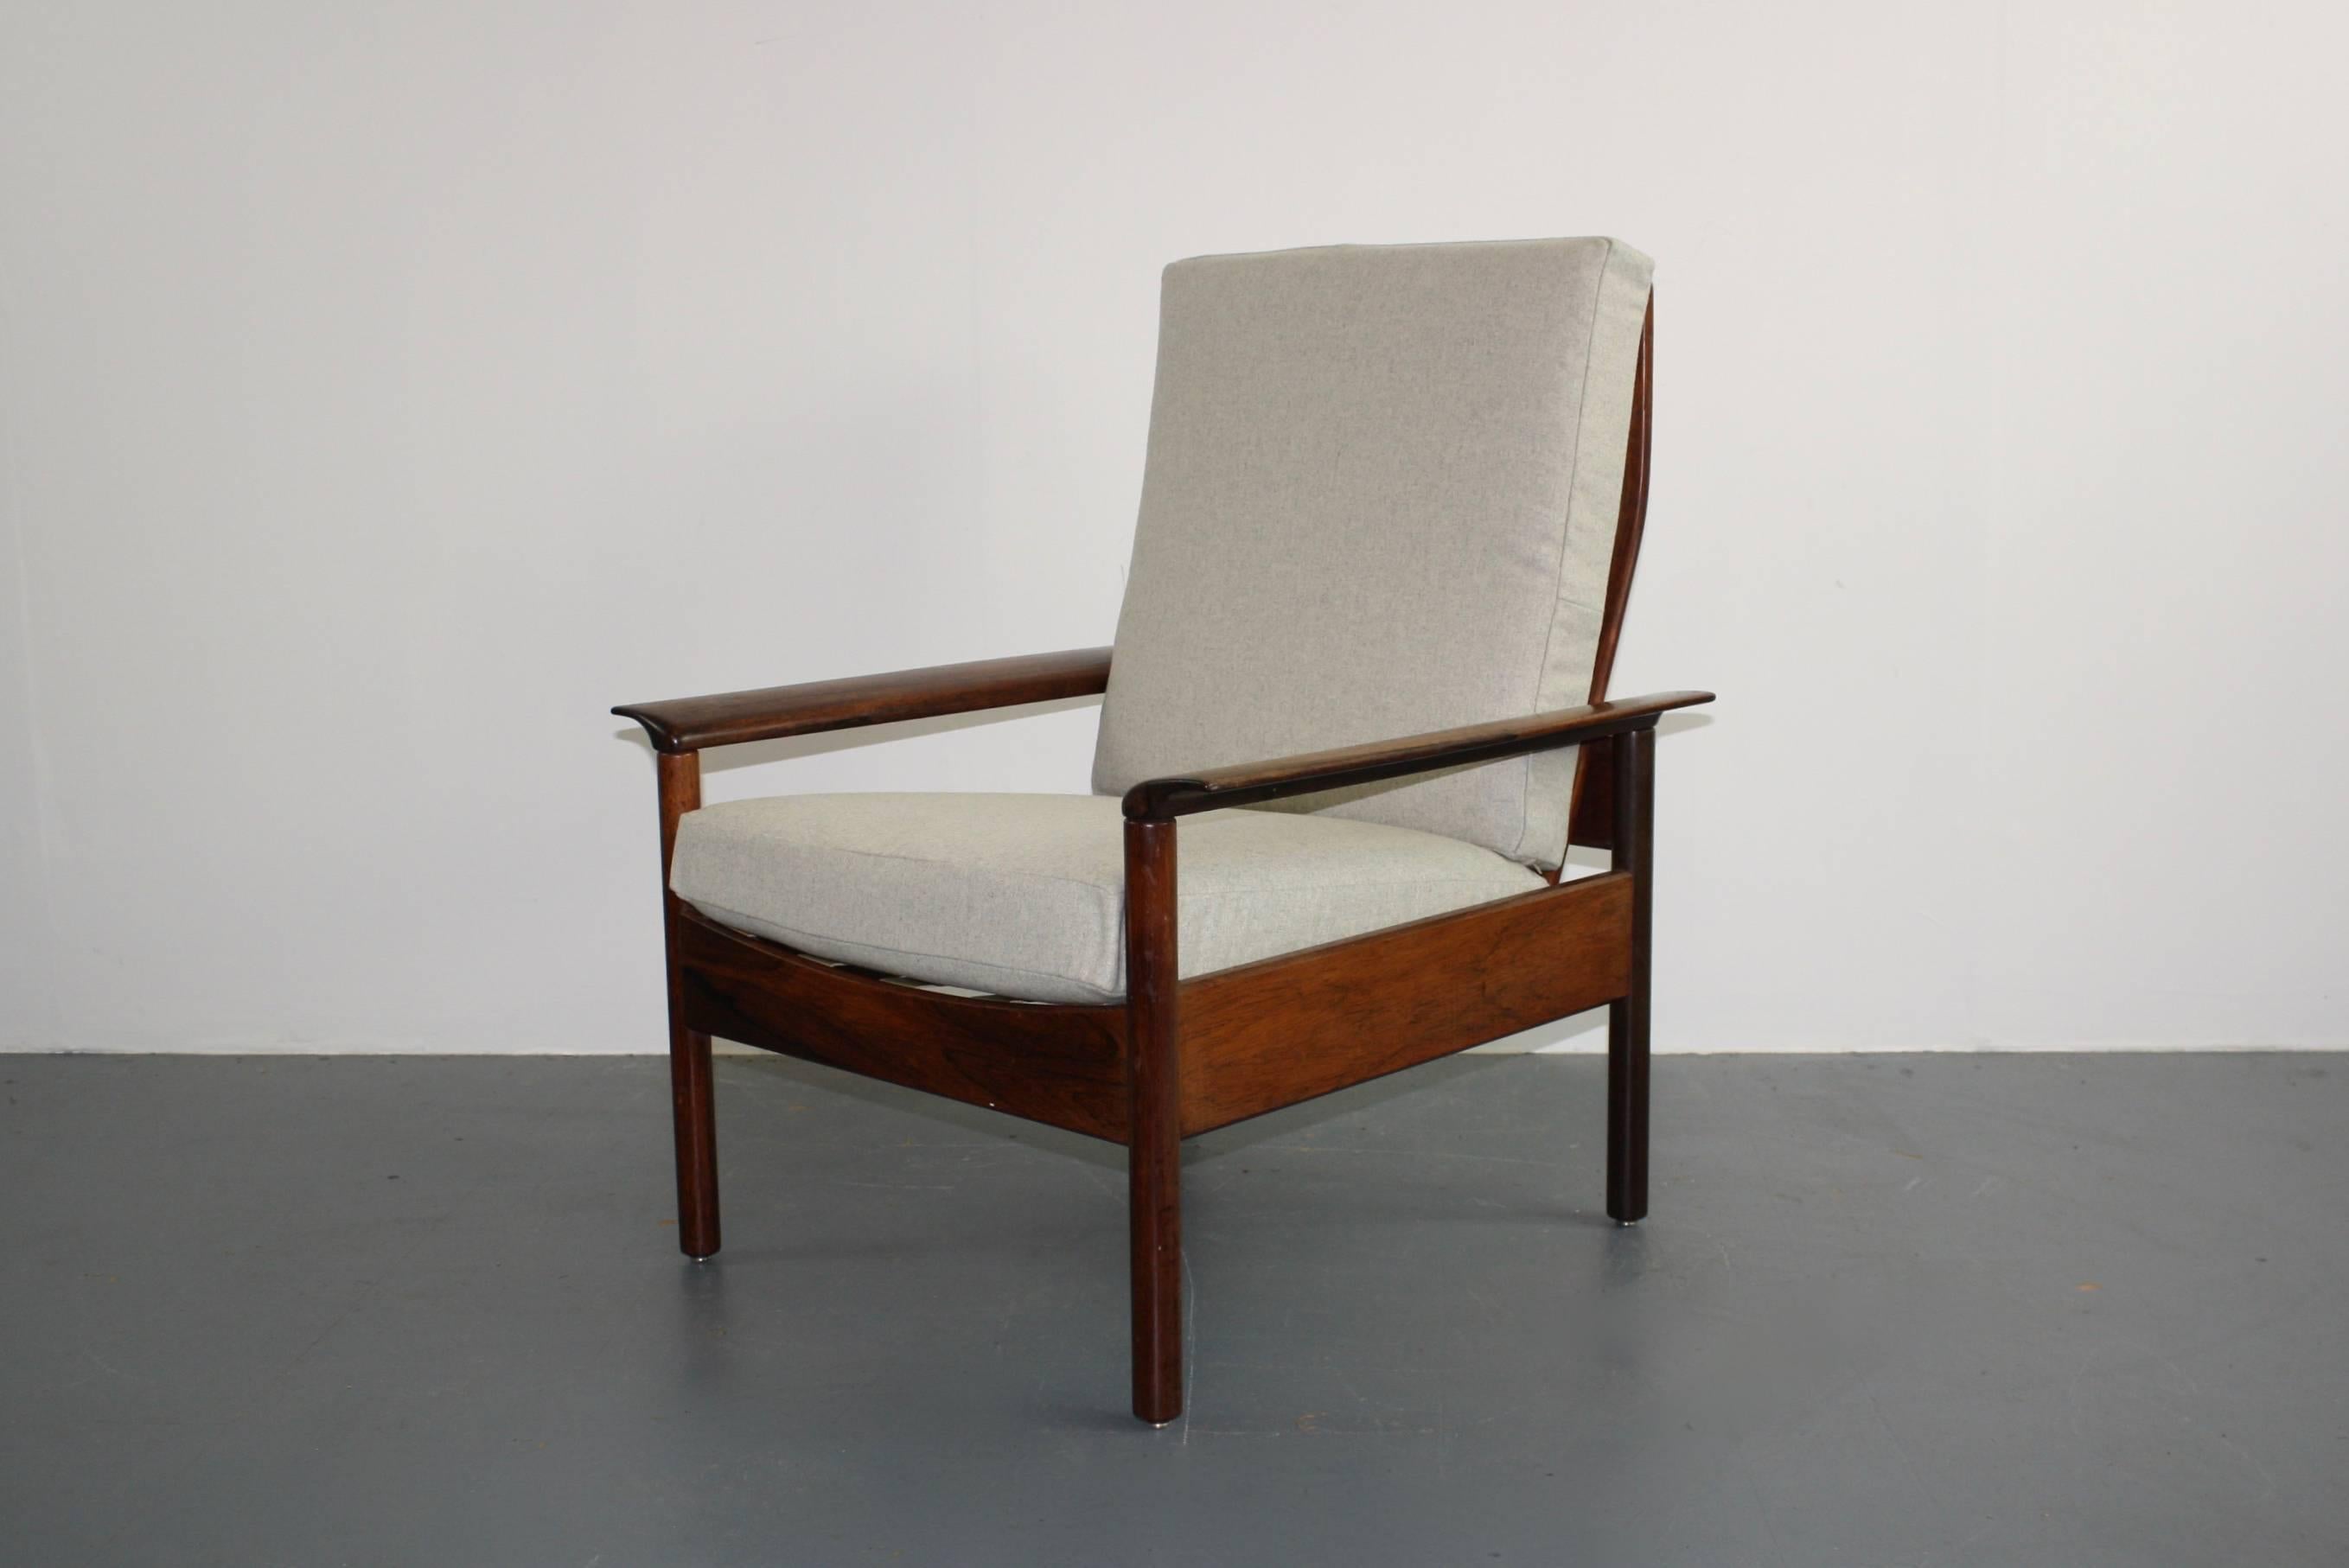 1950s Danish design rosewood lounge chair believed to be Hans Olsen.

Signature curved rosewood arms and unusual string back.

The new upholstery is a pale grey wool fabric. 

Condition-wise, there are some small signs of wear, commensurate